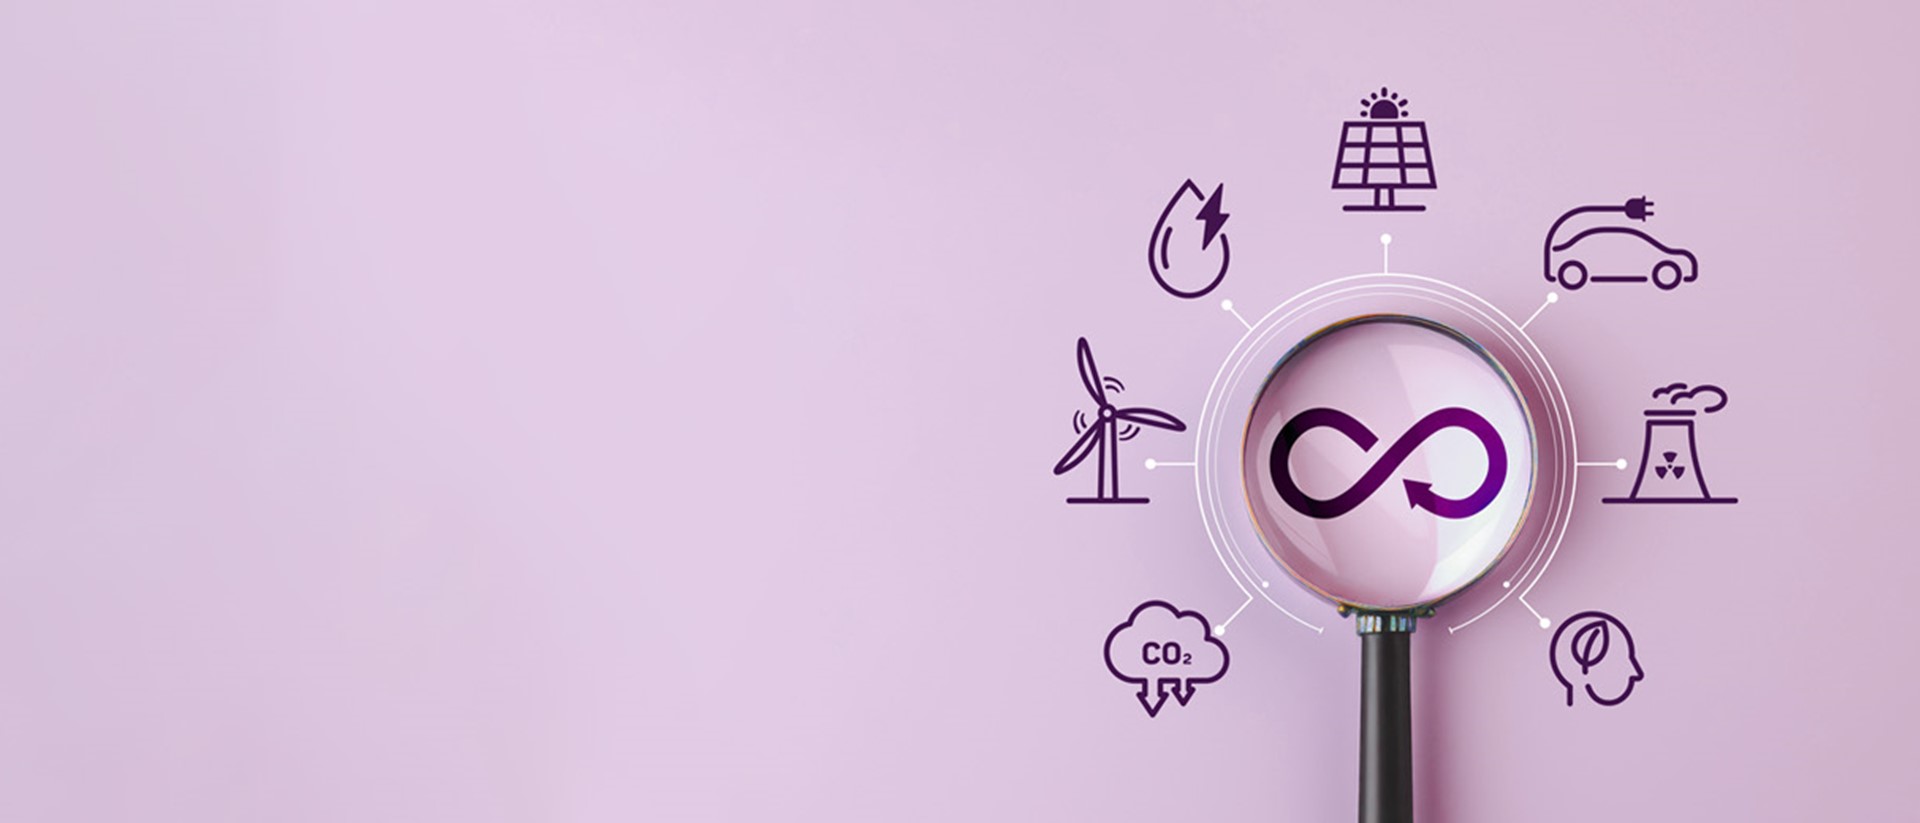 A magnifying glass looking at an infinite symbol with several sustainability icons surrounding it against a pink background.